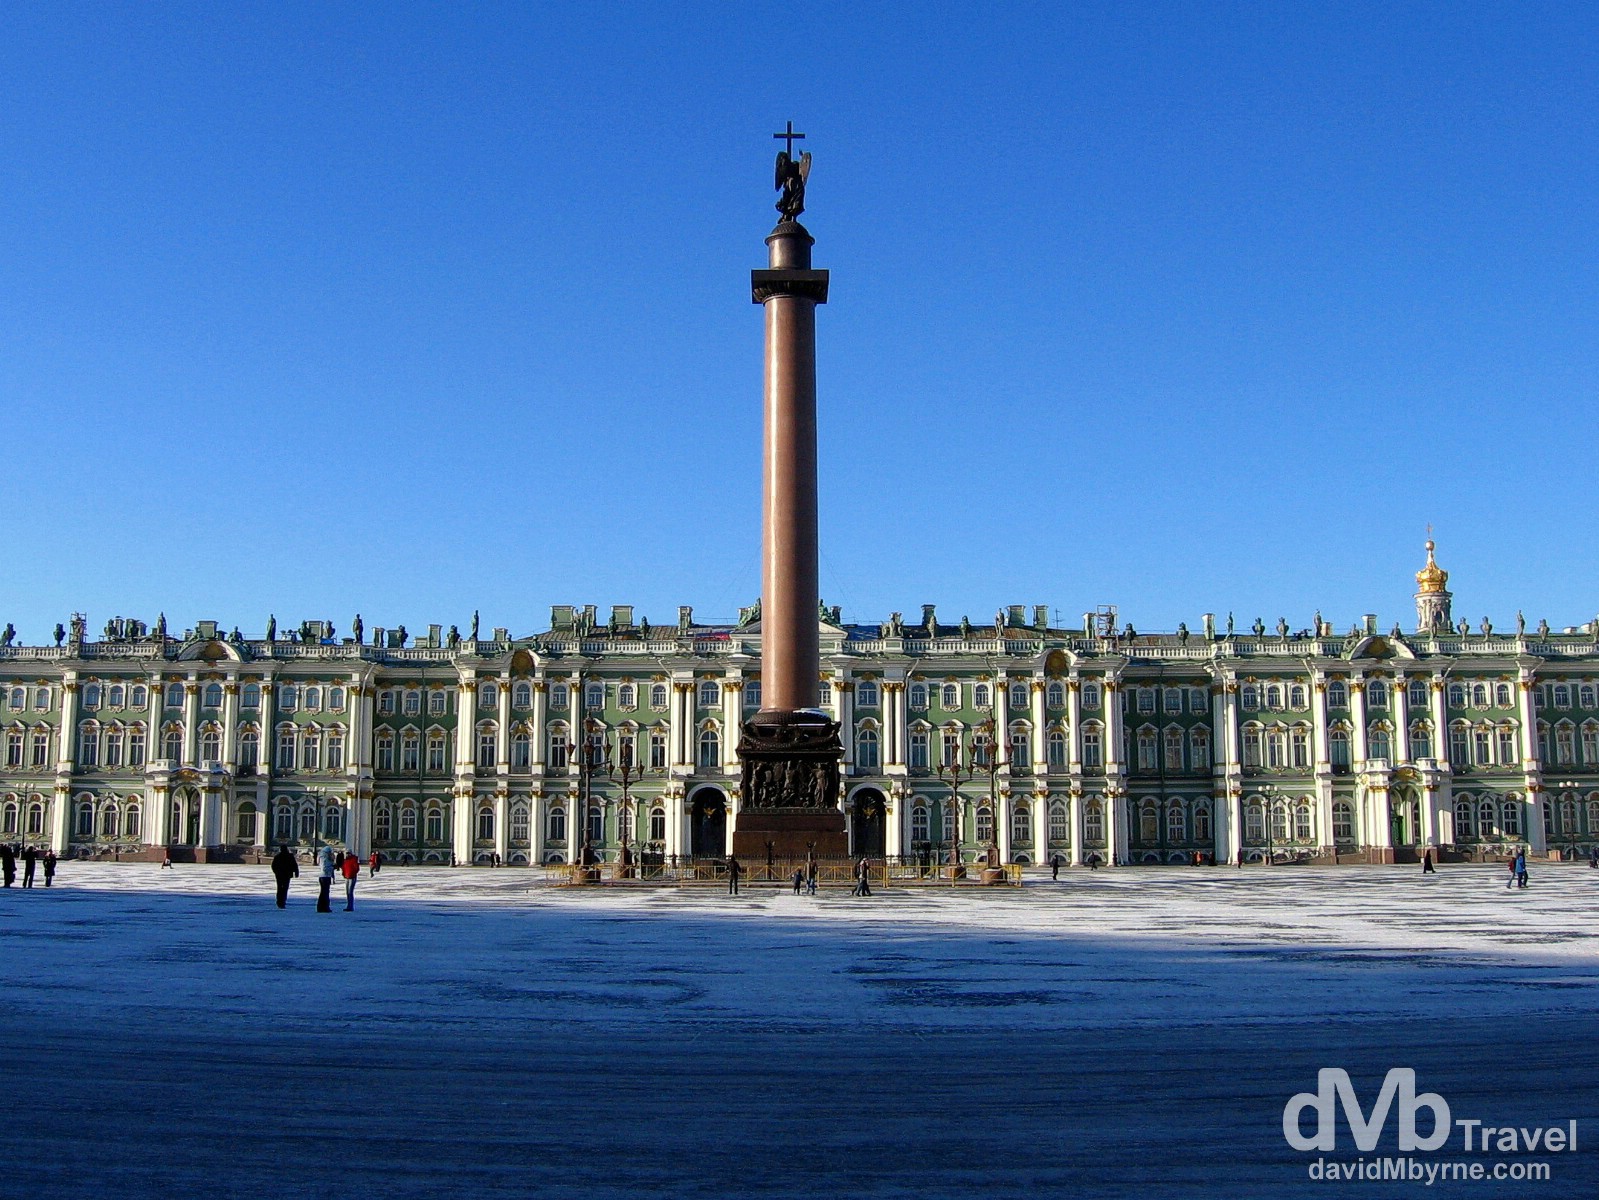 The facade of the Winter Palace & Alexander Column in as seen from Palace Square, St Petersburg, Russia. February 27, 2006. 